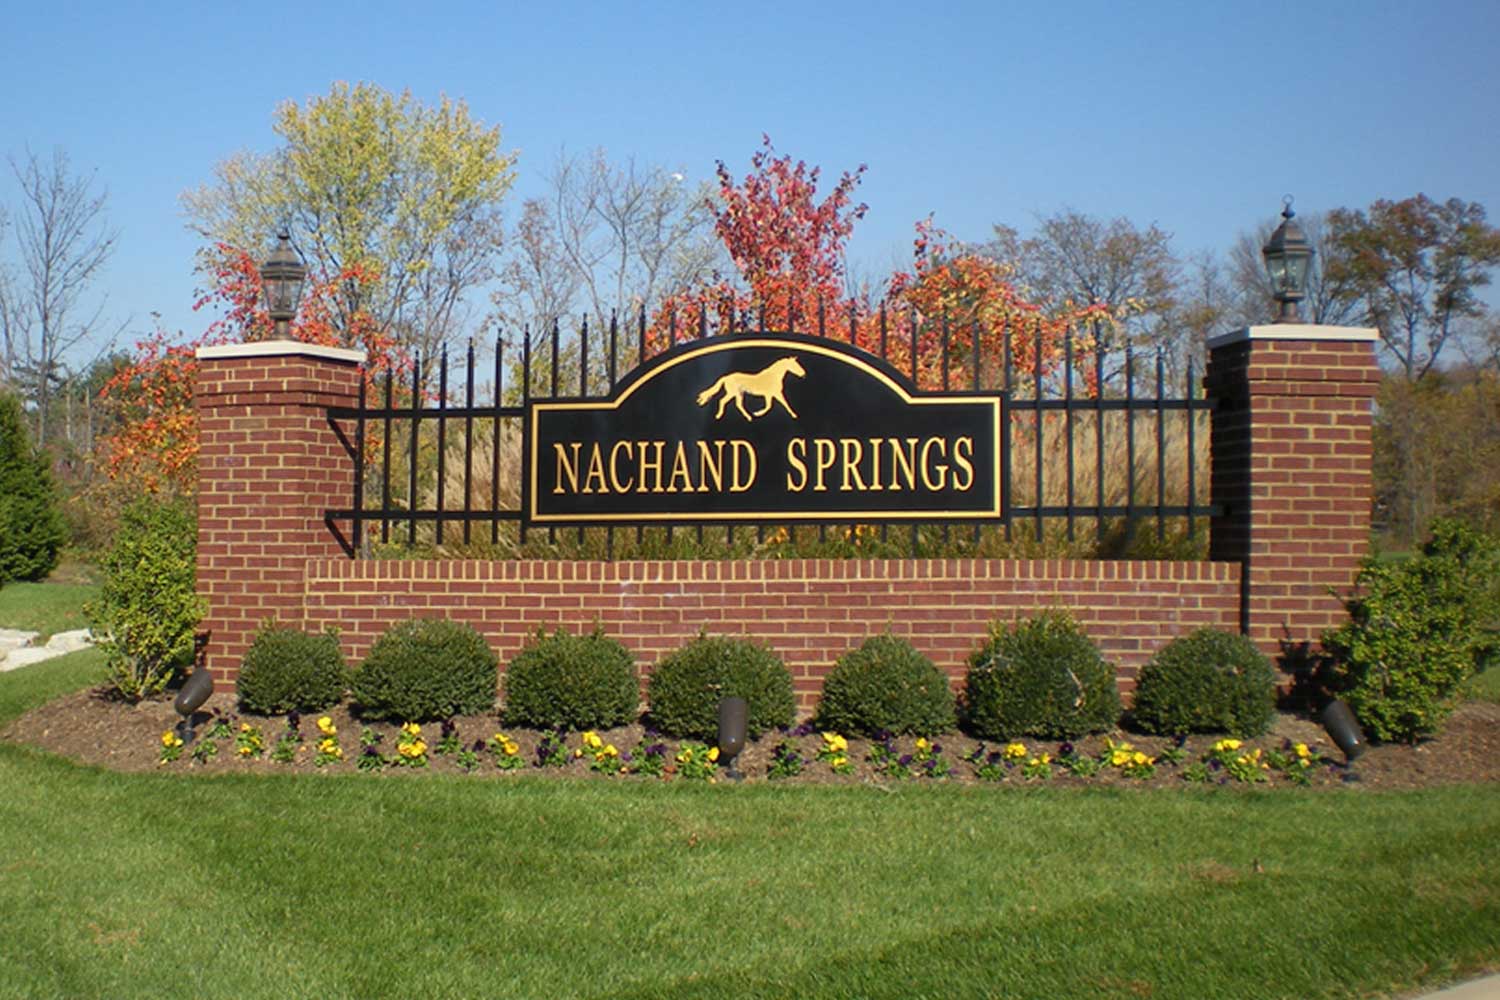 Nachand Springs Development by Judah Company Real Estate Agency in Louisville KY specializing in sales, development, and construction.